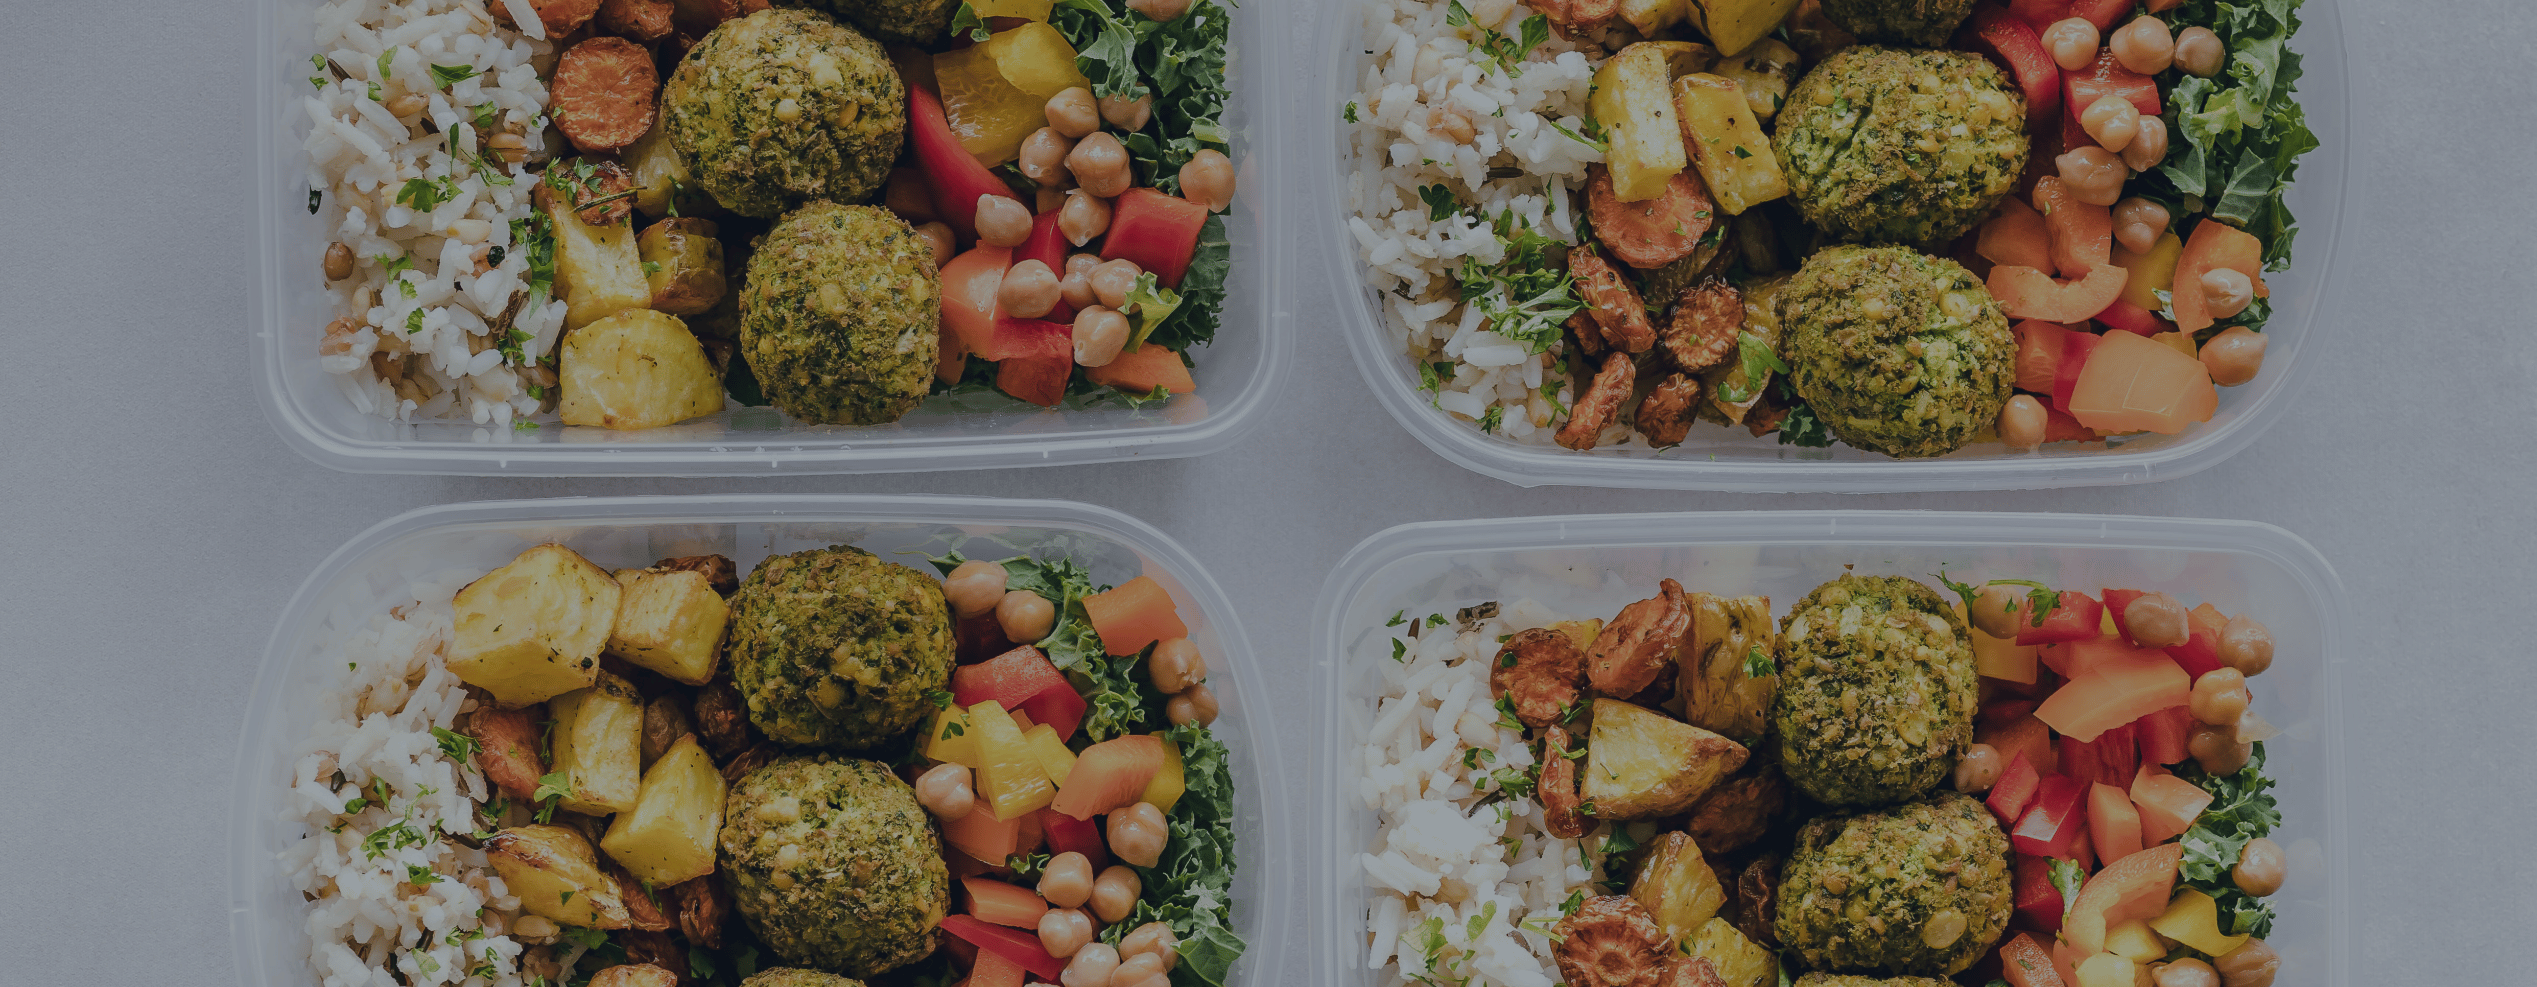 Meal Prepping Containers with Rice Potato and Vegetables